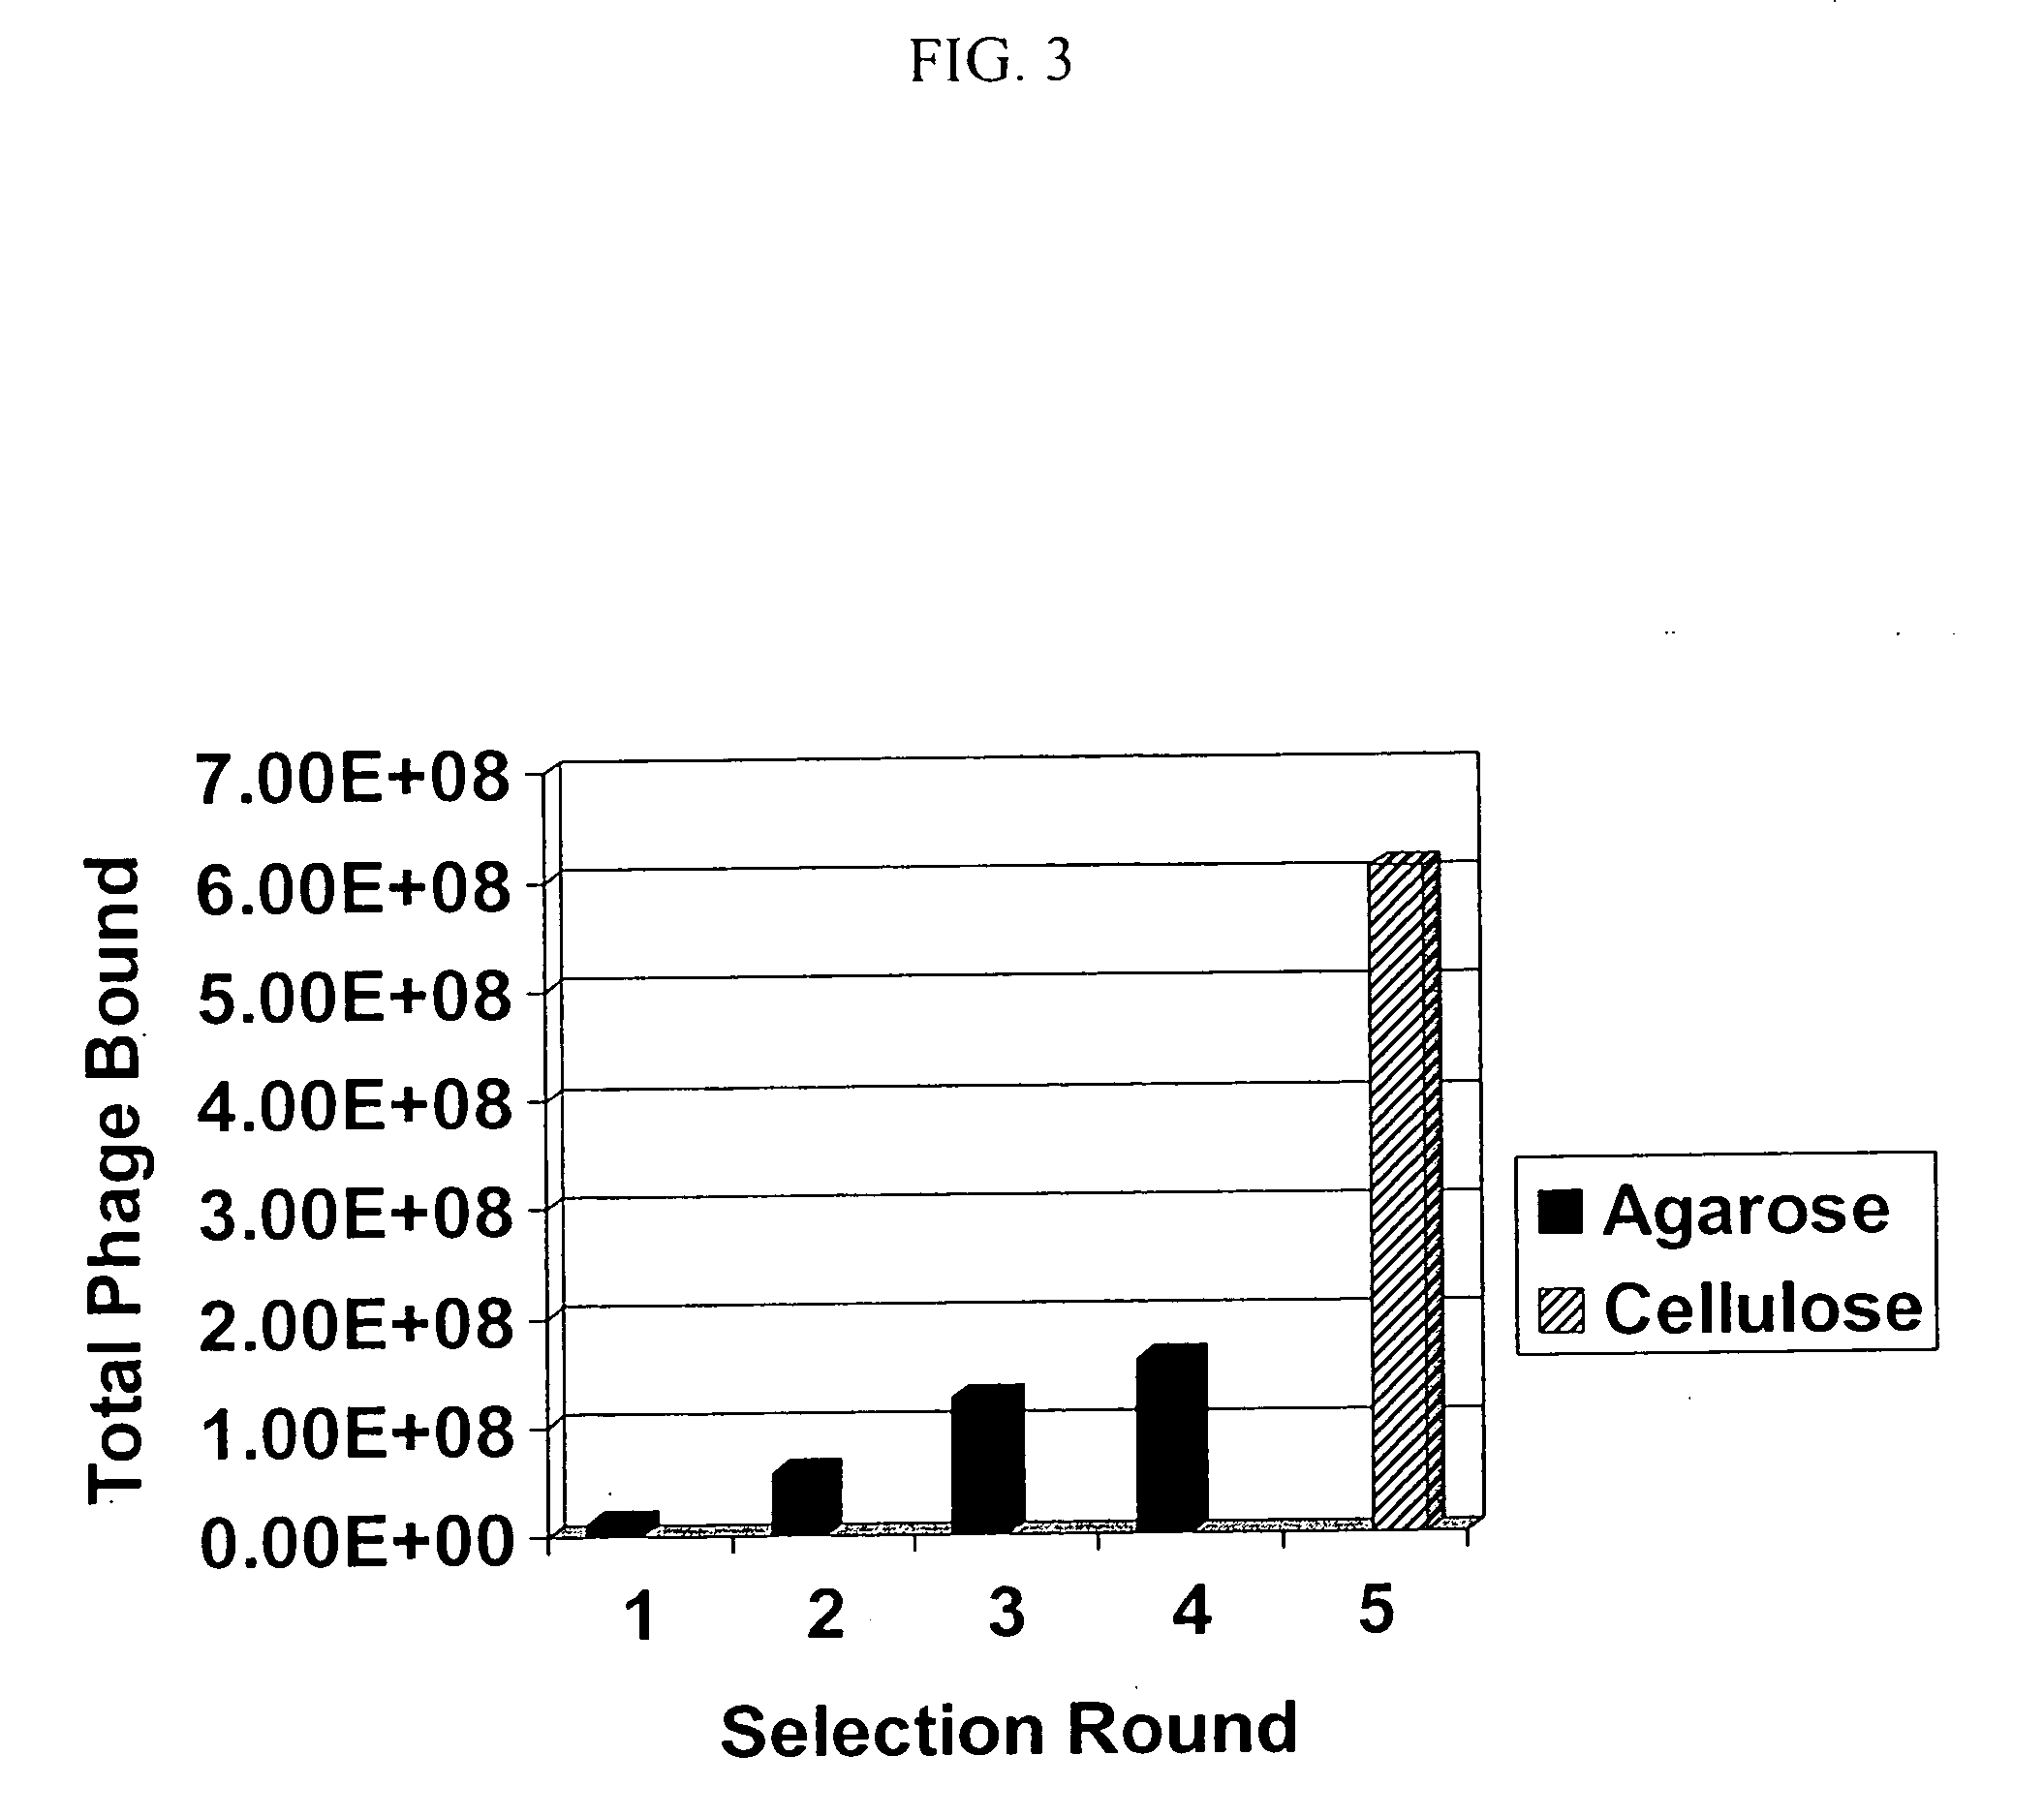 Peptides for targeting the prostate specific membrane antigen